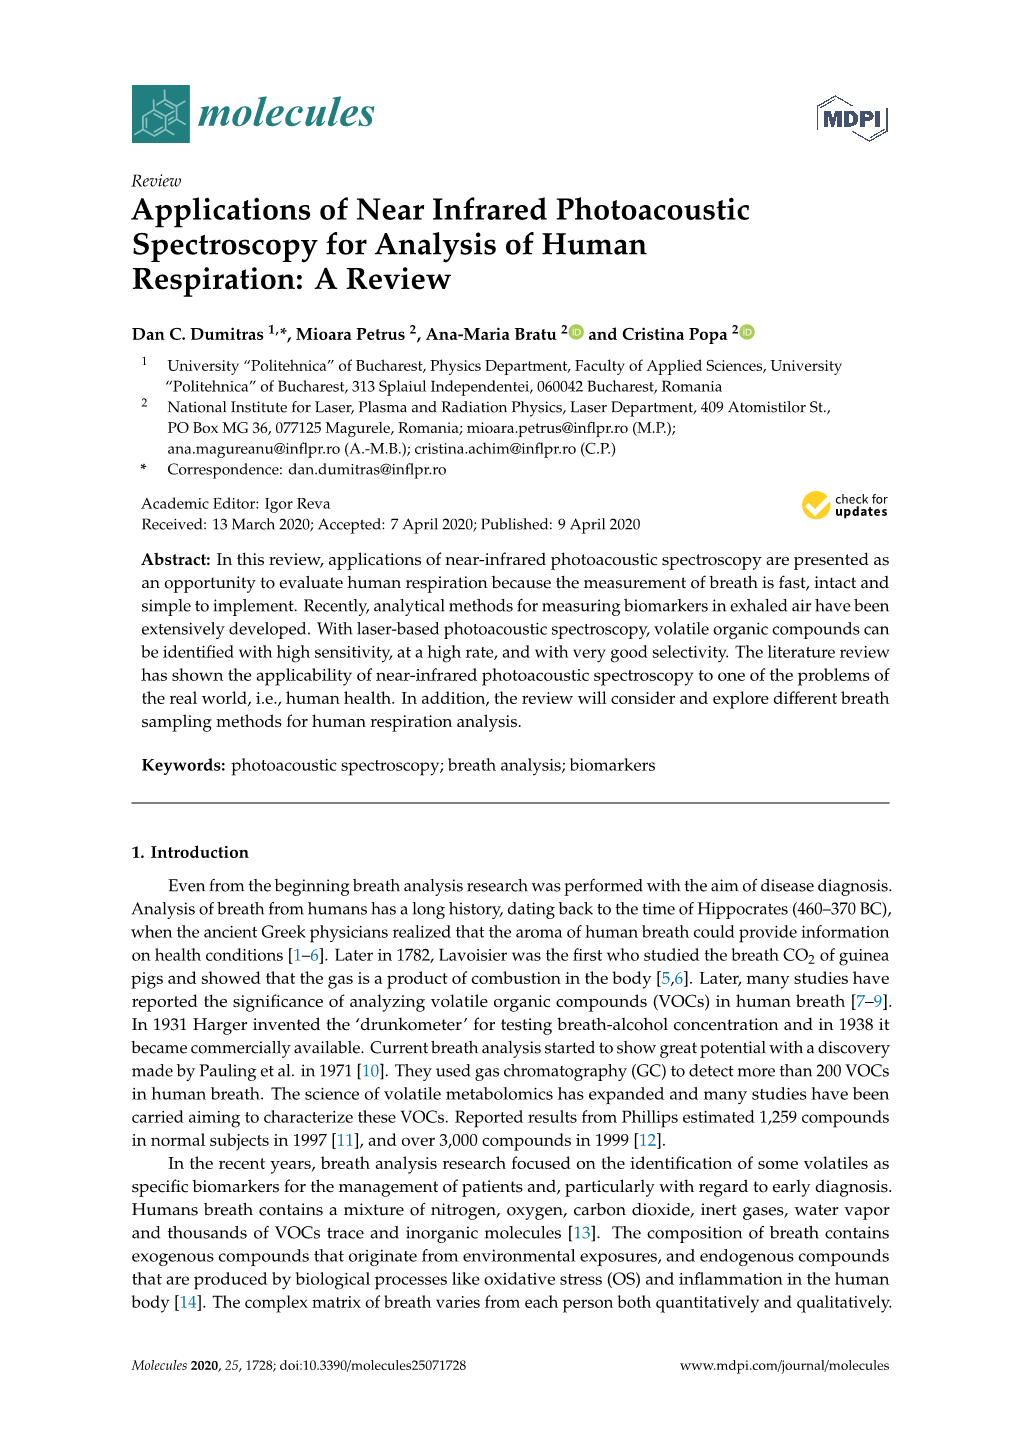 Applications of Near Infrared Photoacoustic Spectroscopy for Analysis of Human Respiration: a Review